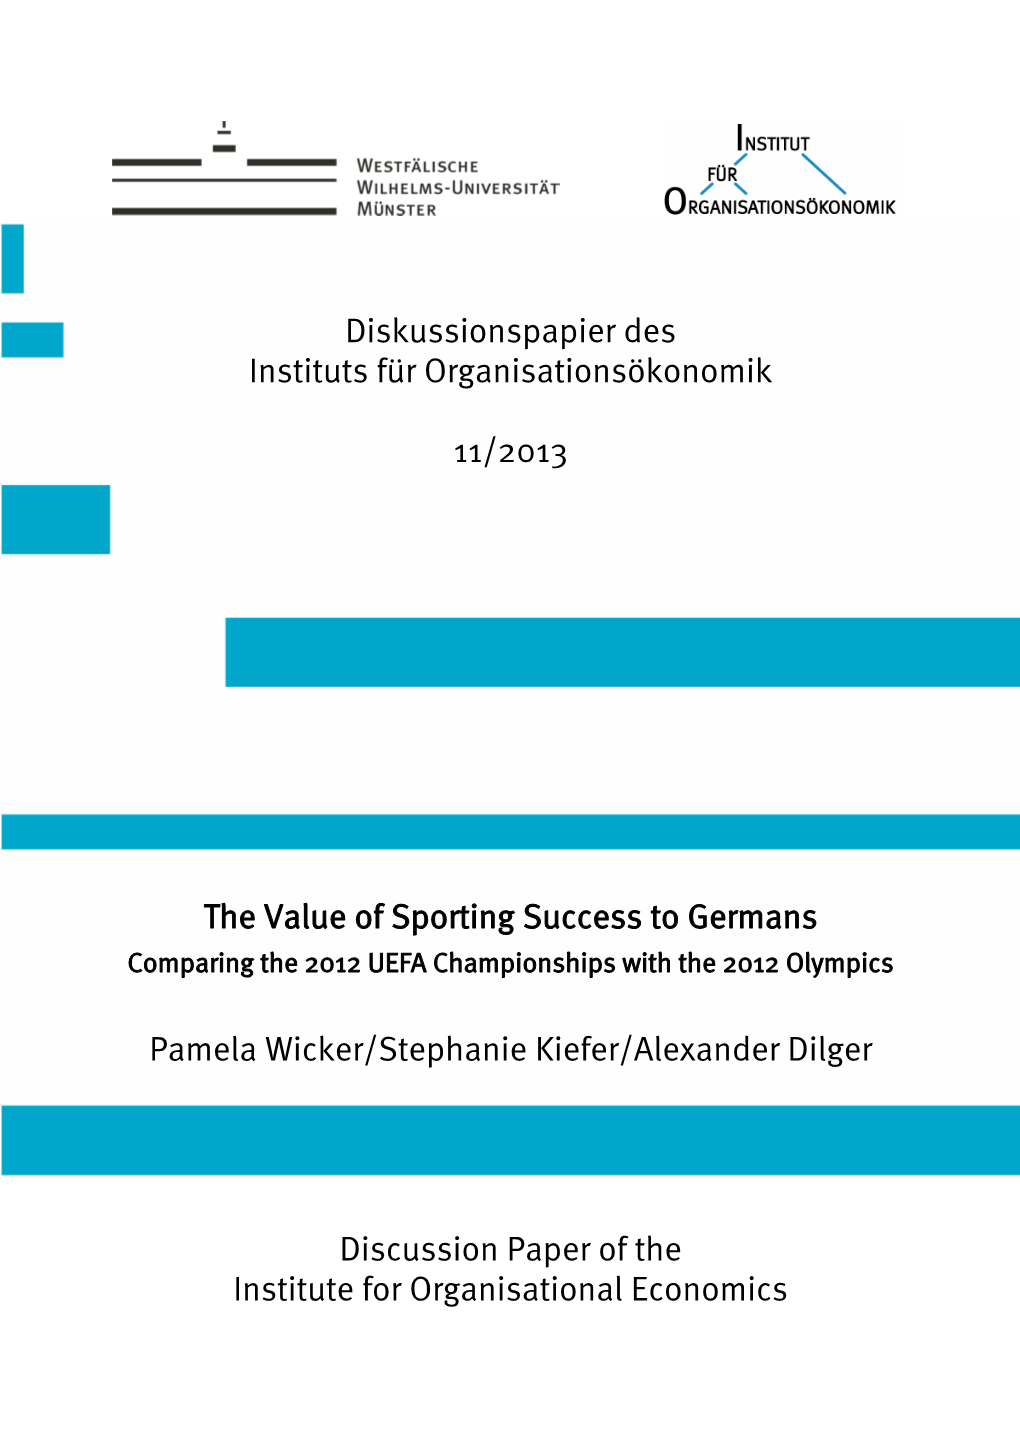 The Value of Sporting Success to Germans Comparing the 2012 UEFA Championships with the 2012 Olympics